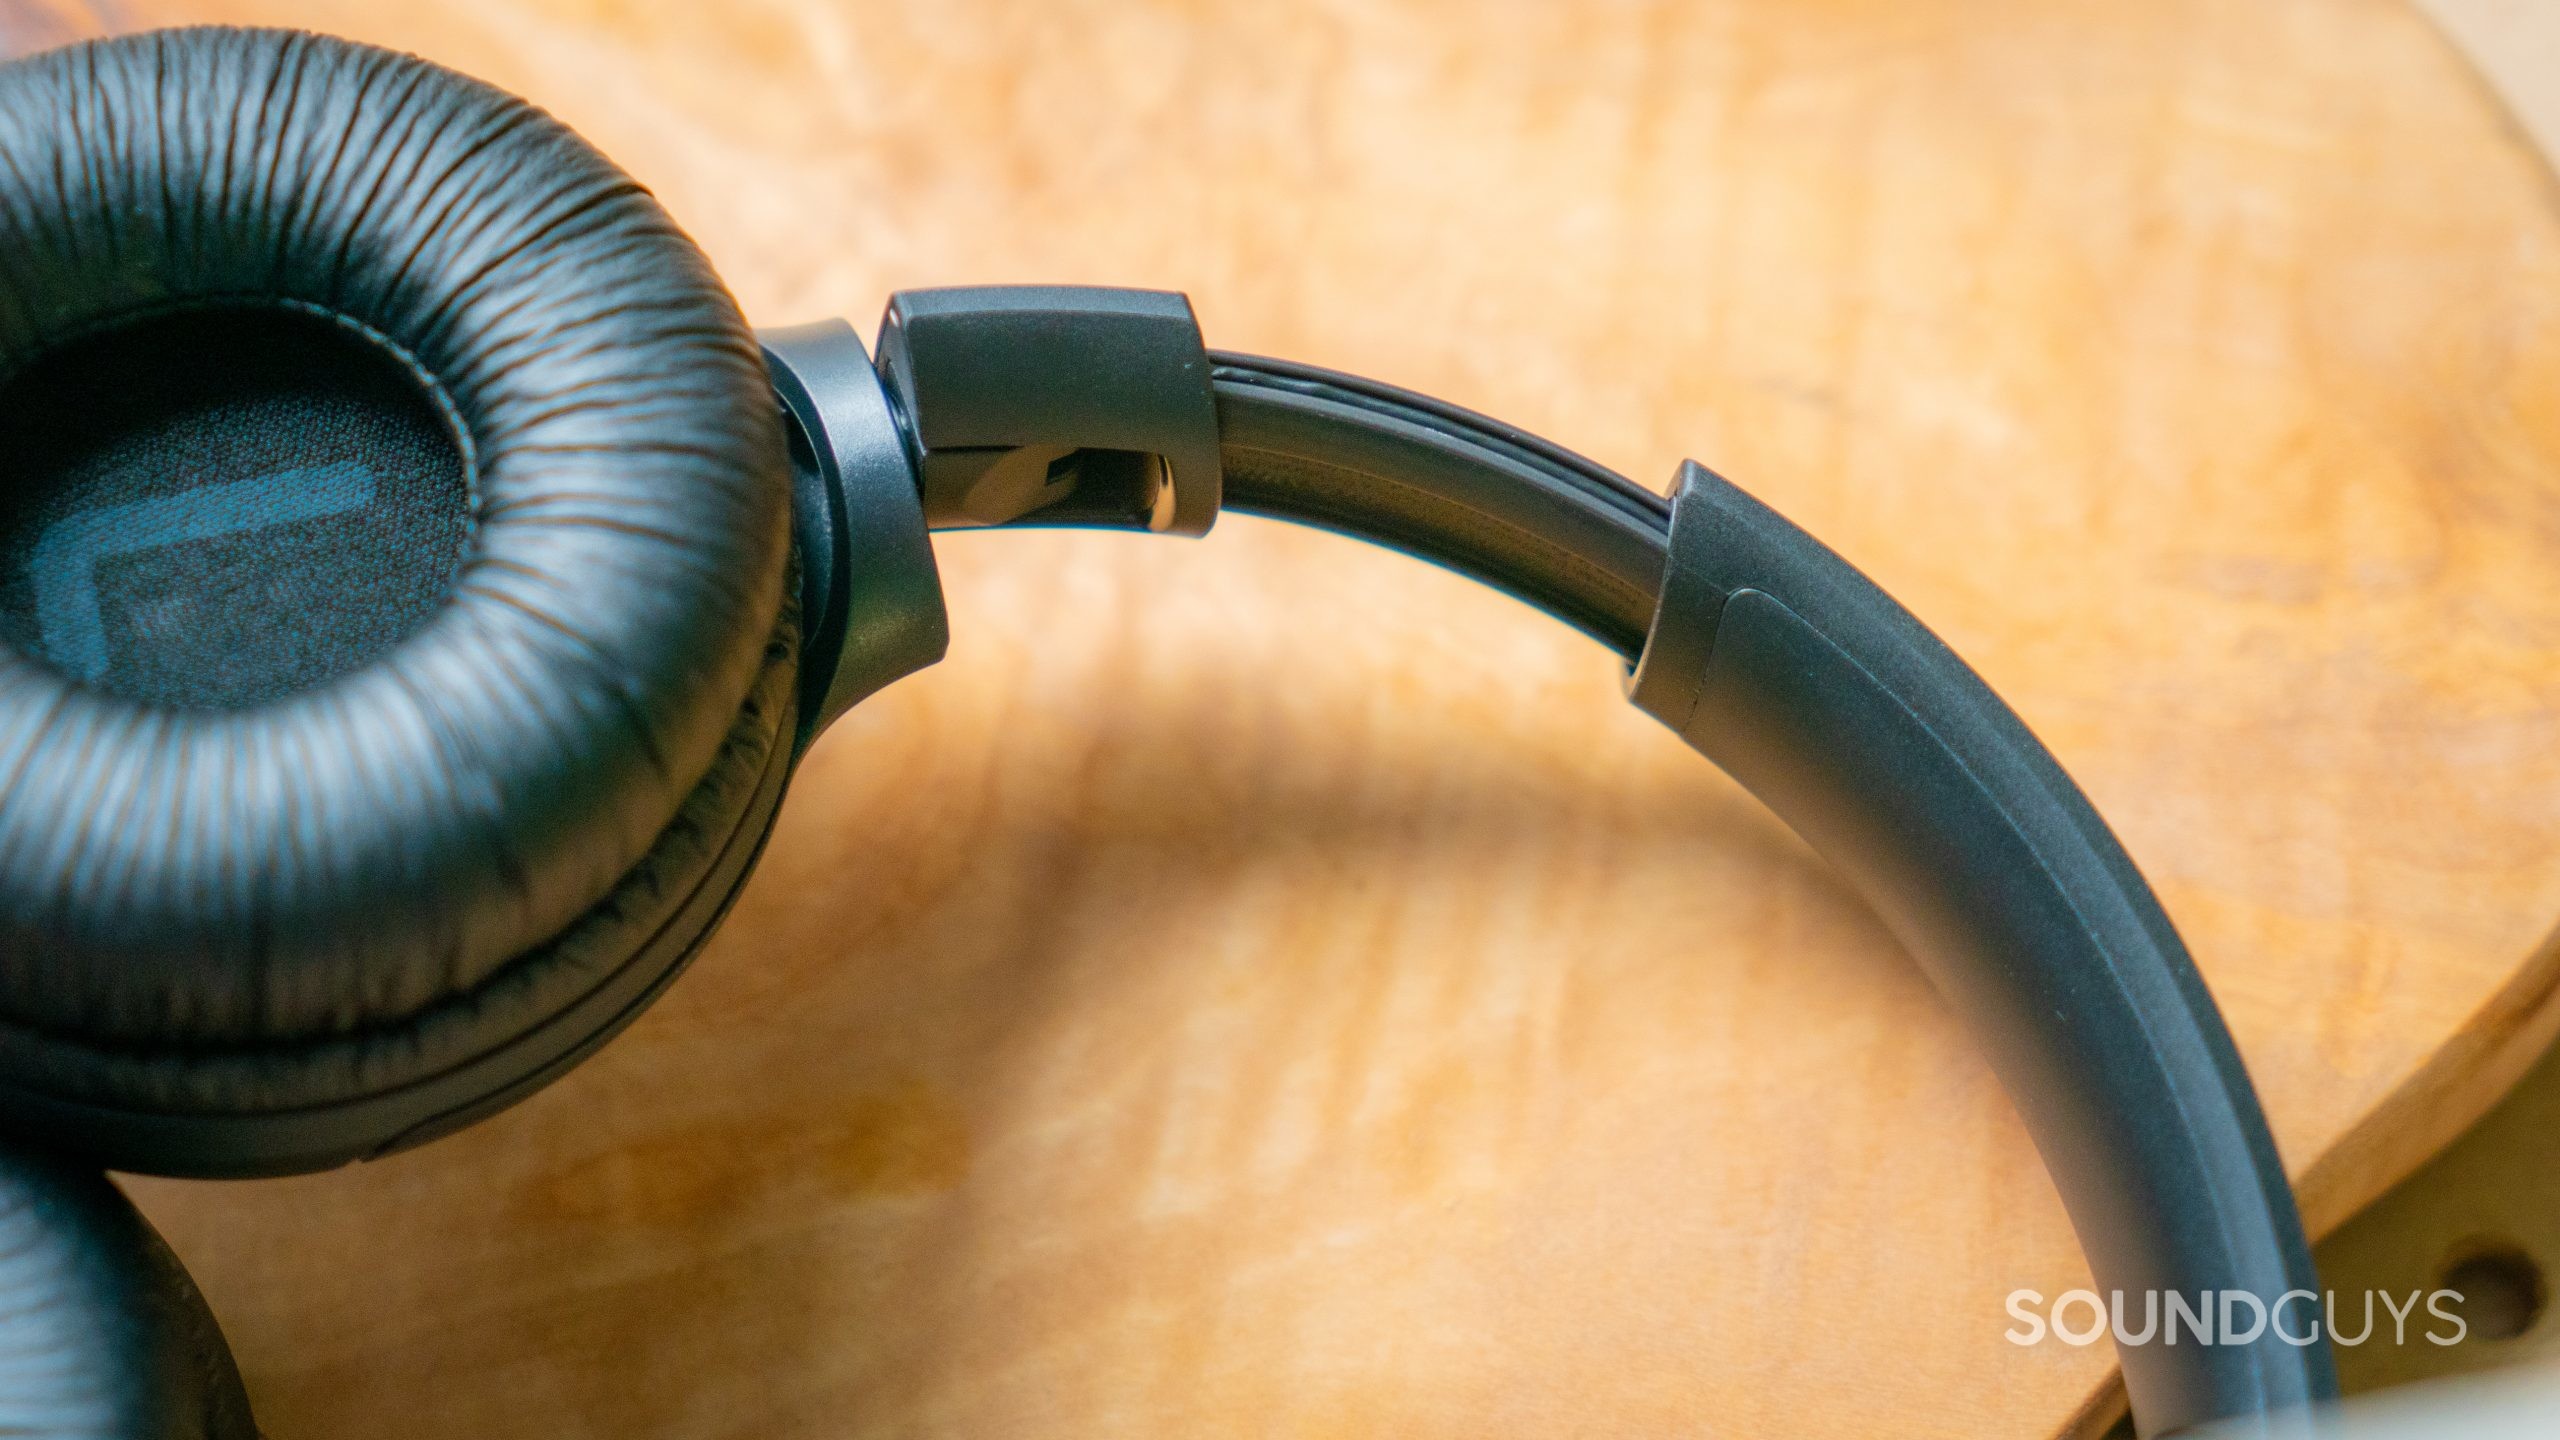 The headband of the JBL Tune 500 in closeup, showing the adjustment mechanism and left ear cup.